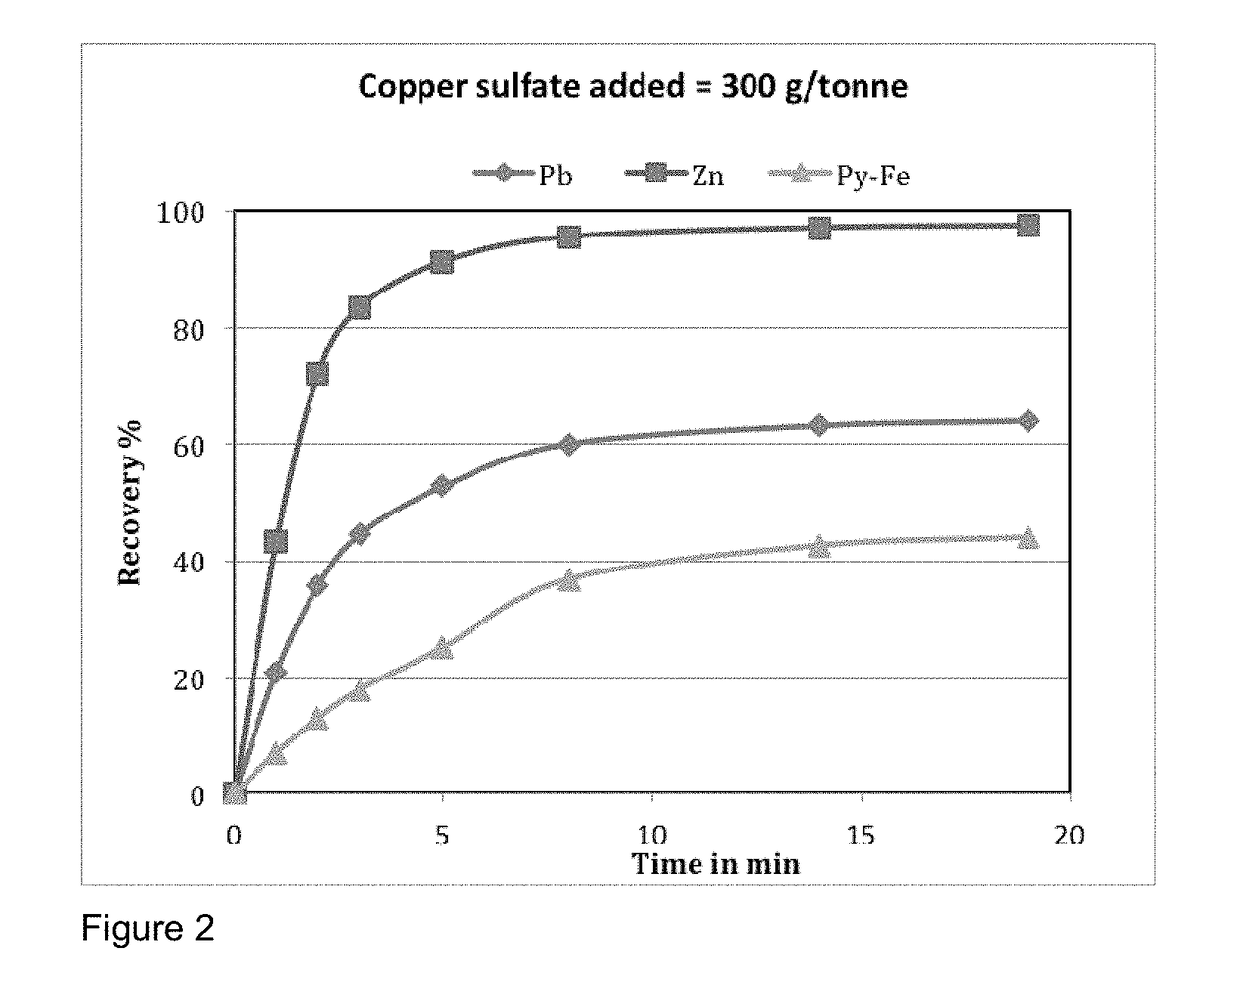 Flotation of sphalerite from mixed base metal sulfide ores either without or with largely reduced amount of copper sulfate addition using 2-(alkylamino)ethanethiols as collectors